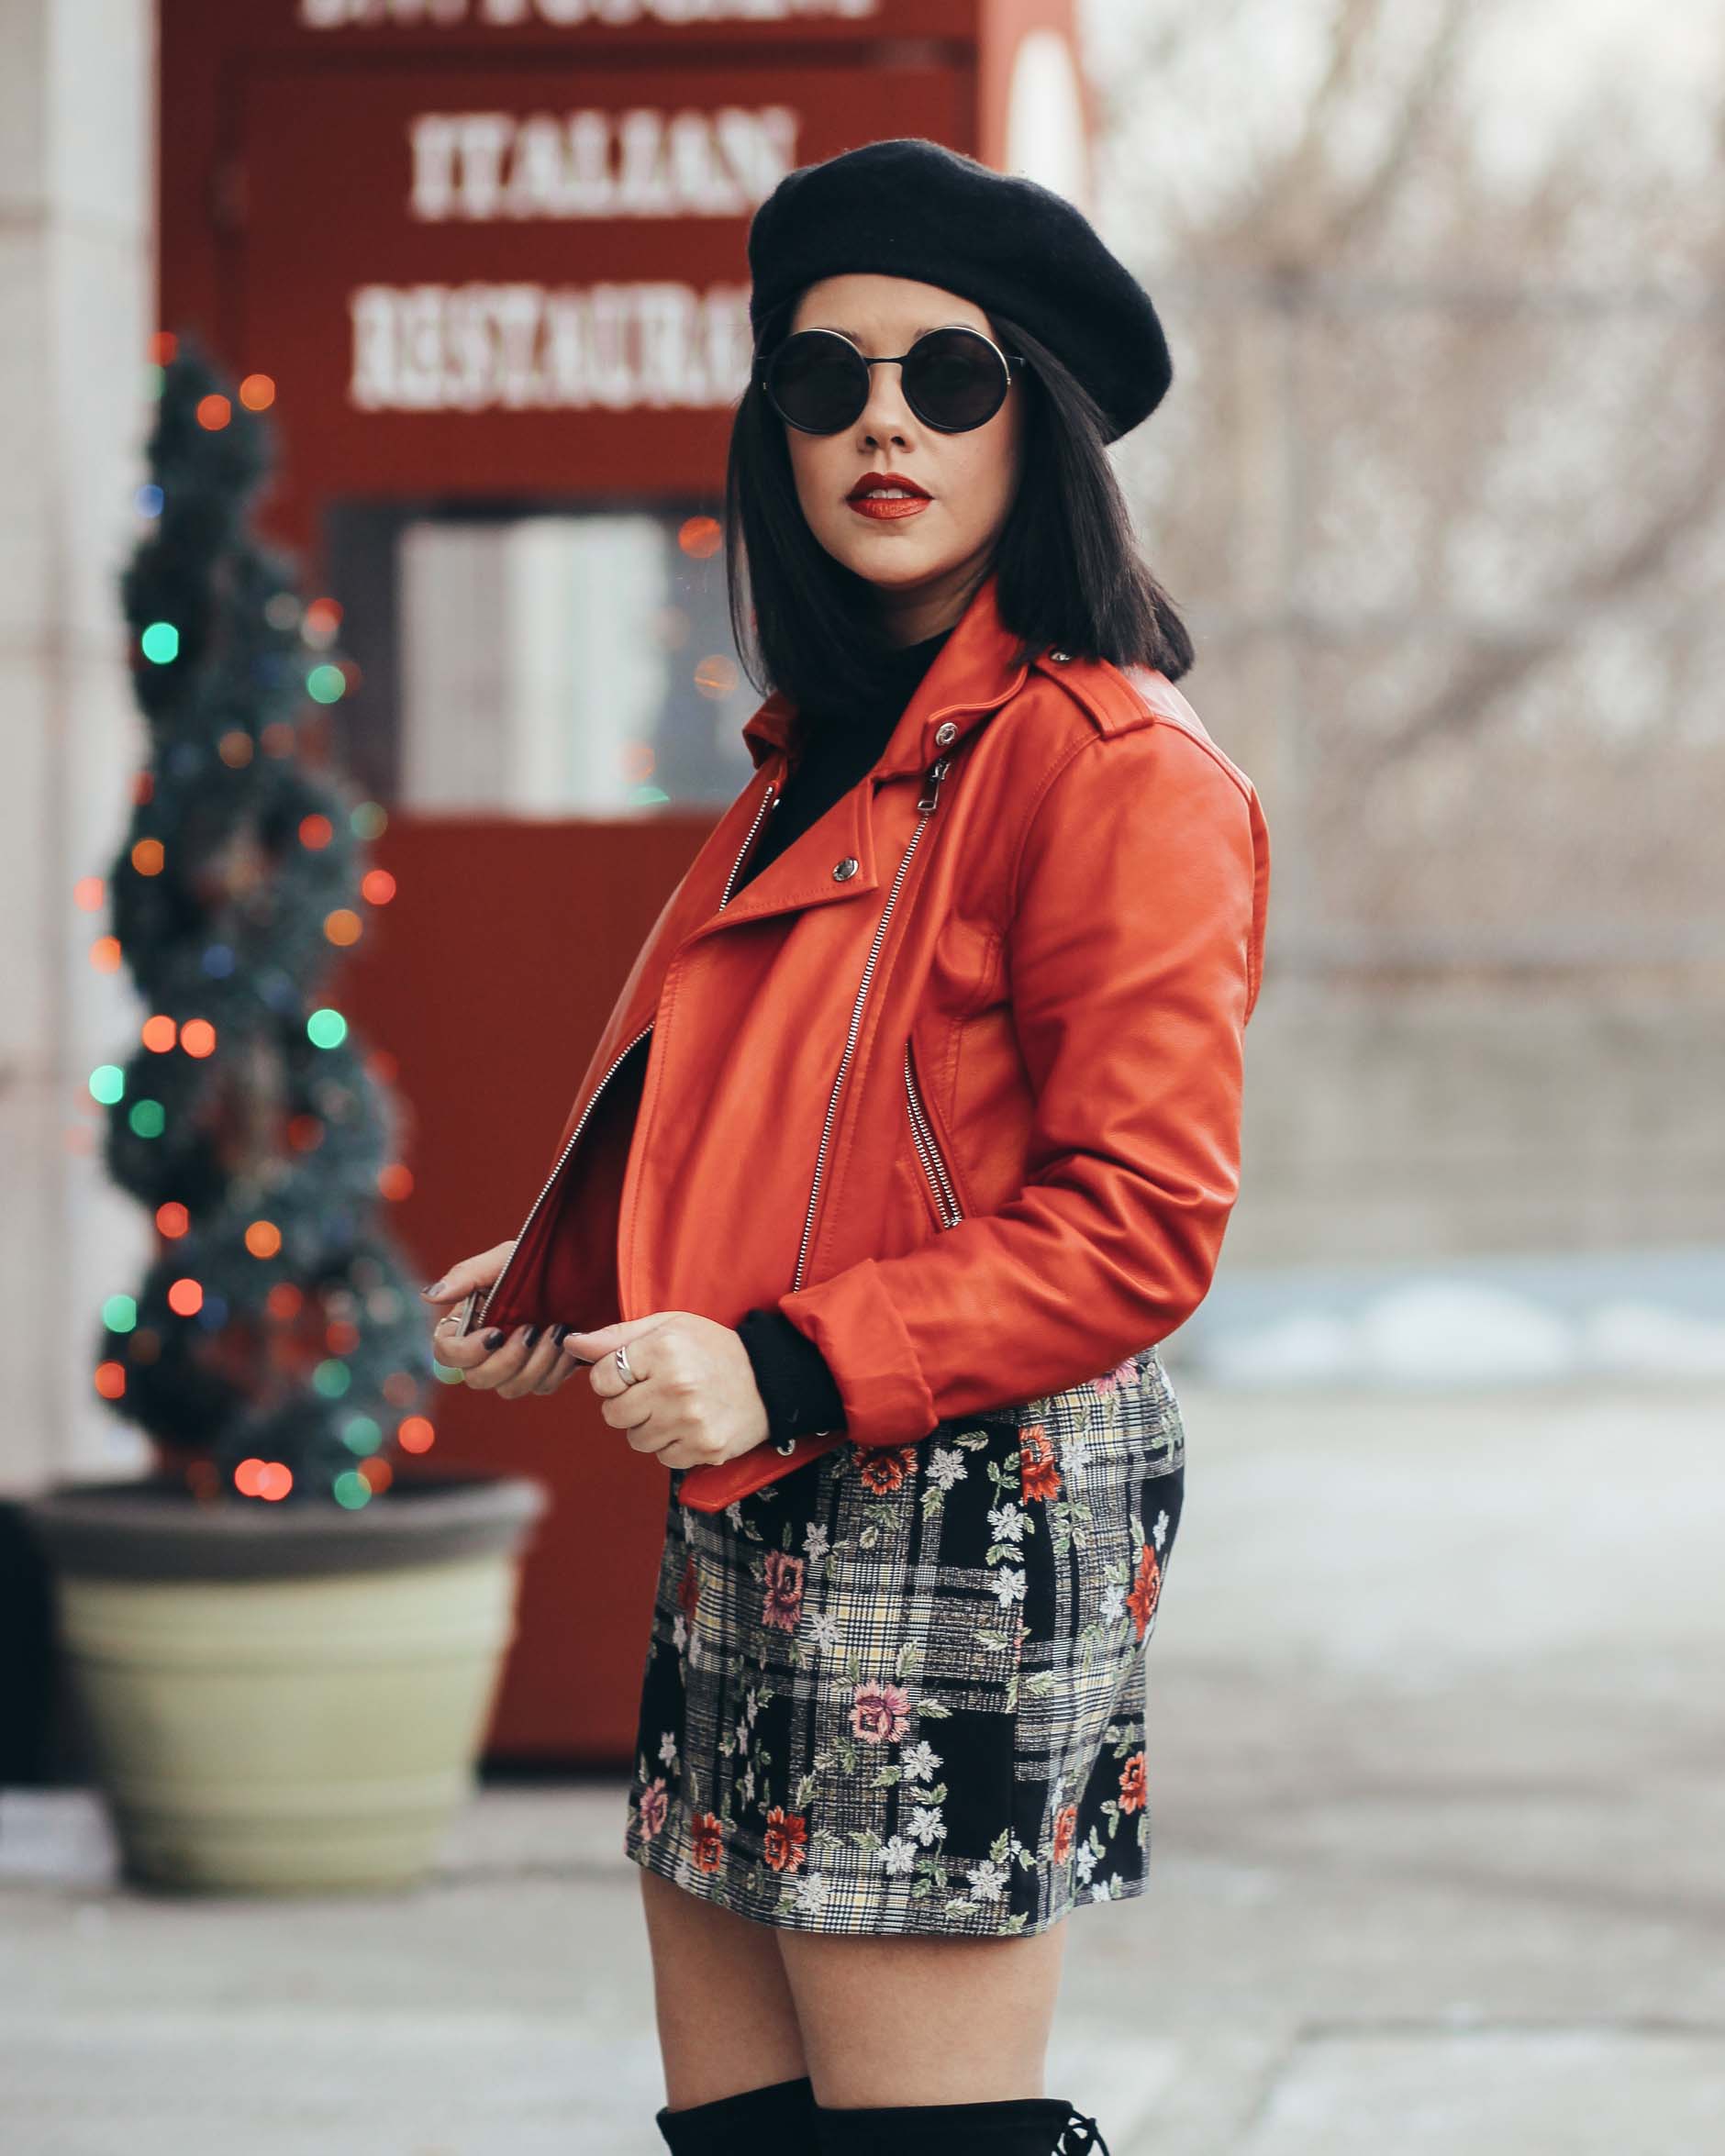 naty michele wearing a red moto jacket with floral skirt